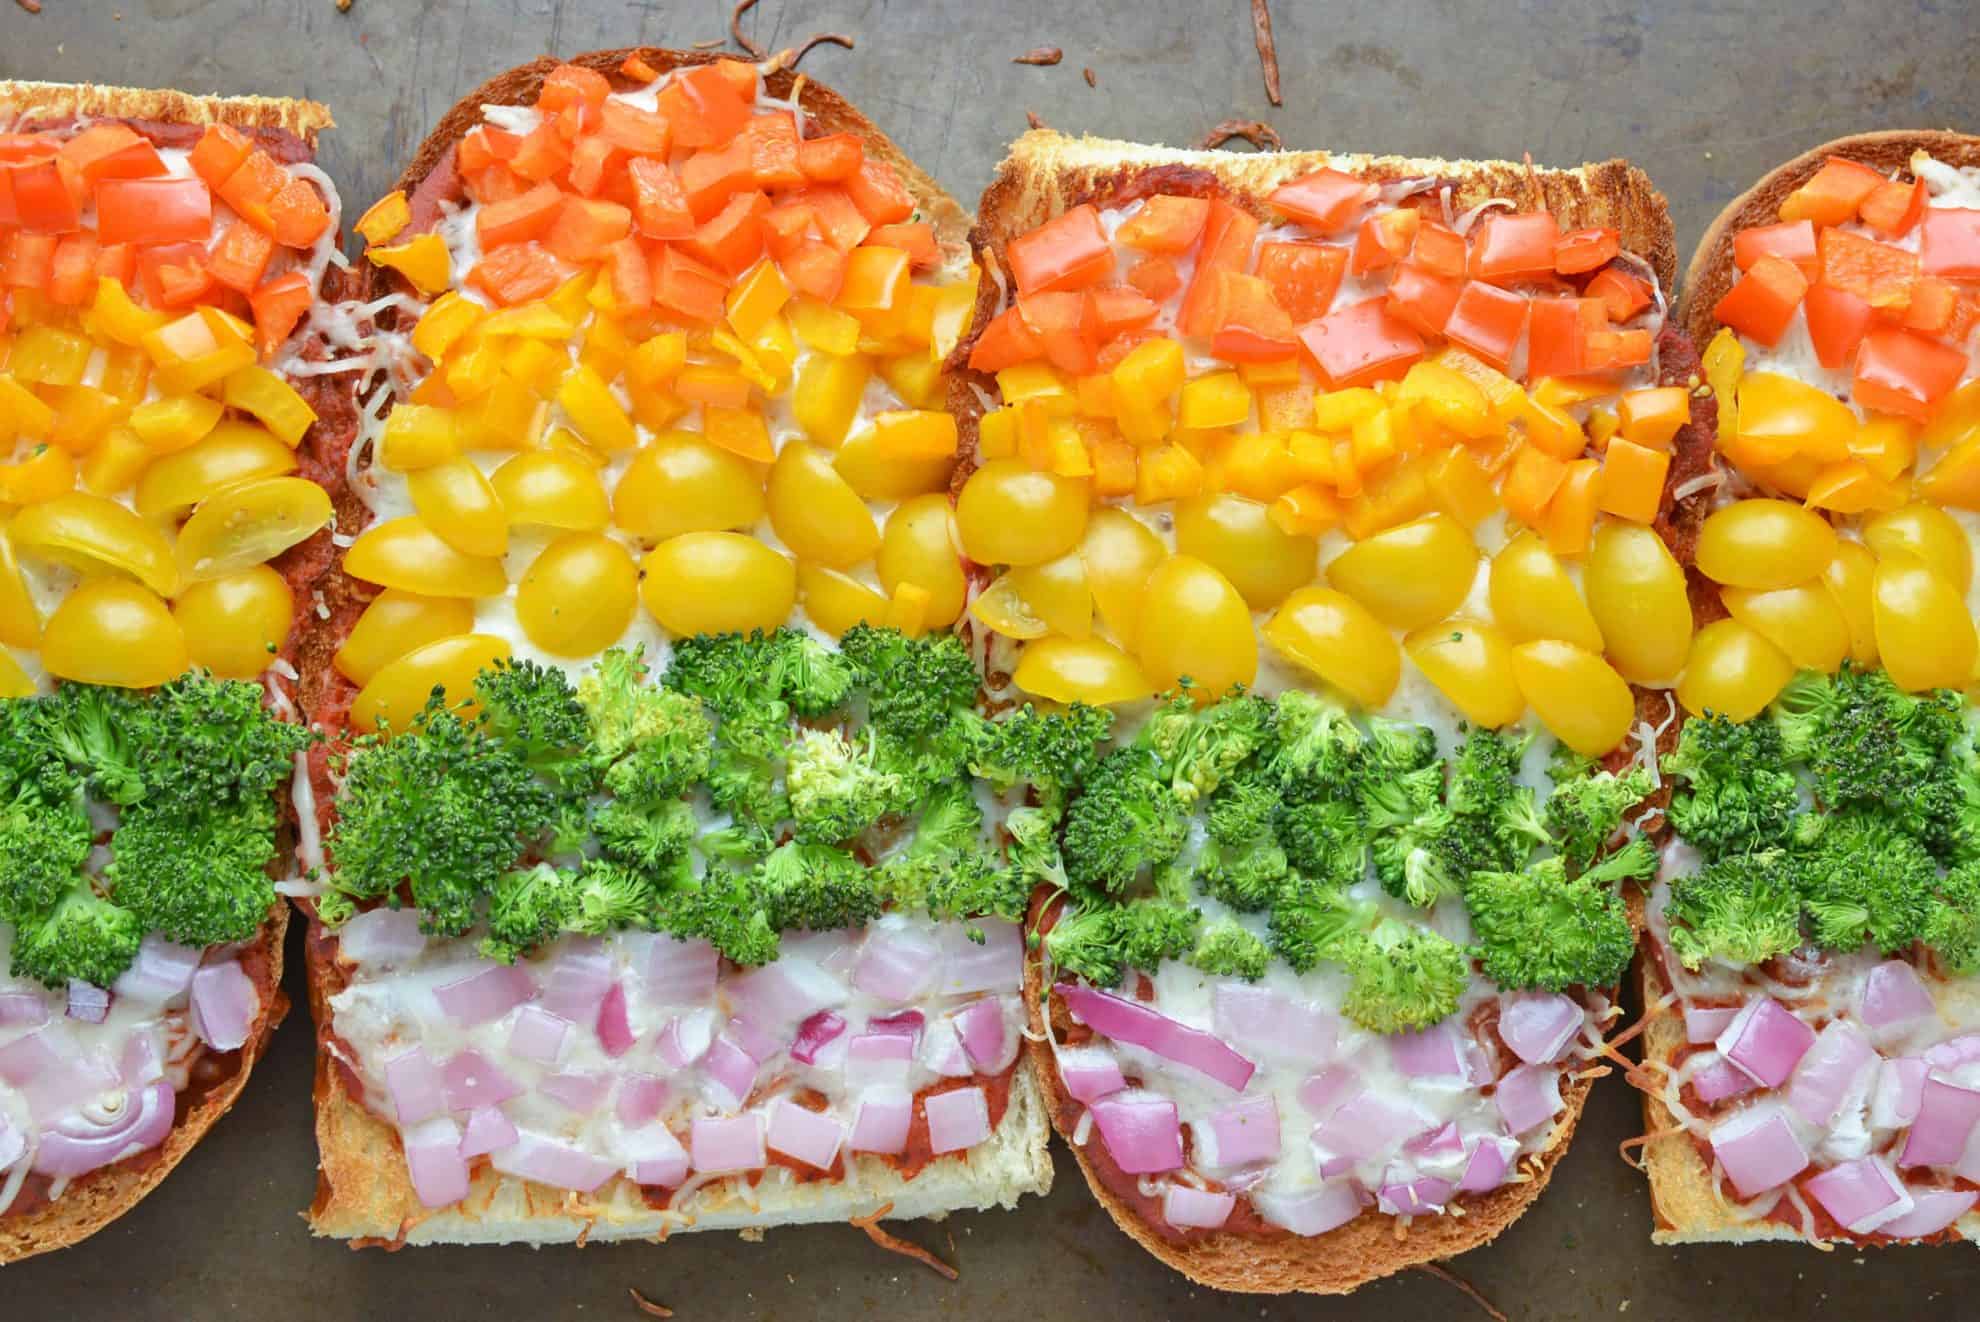 Rainbow French Bread Pizza on a Baking Sheet